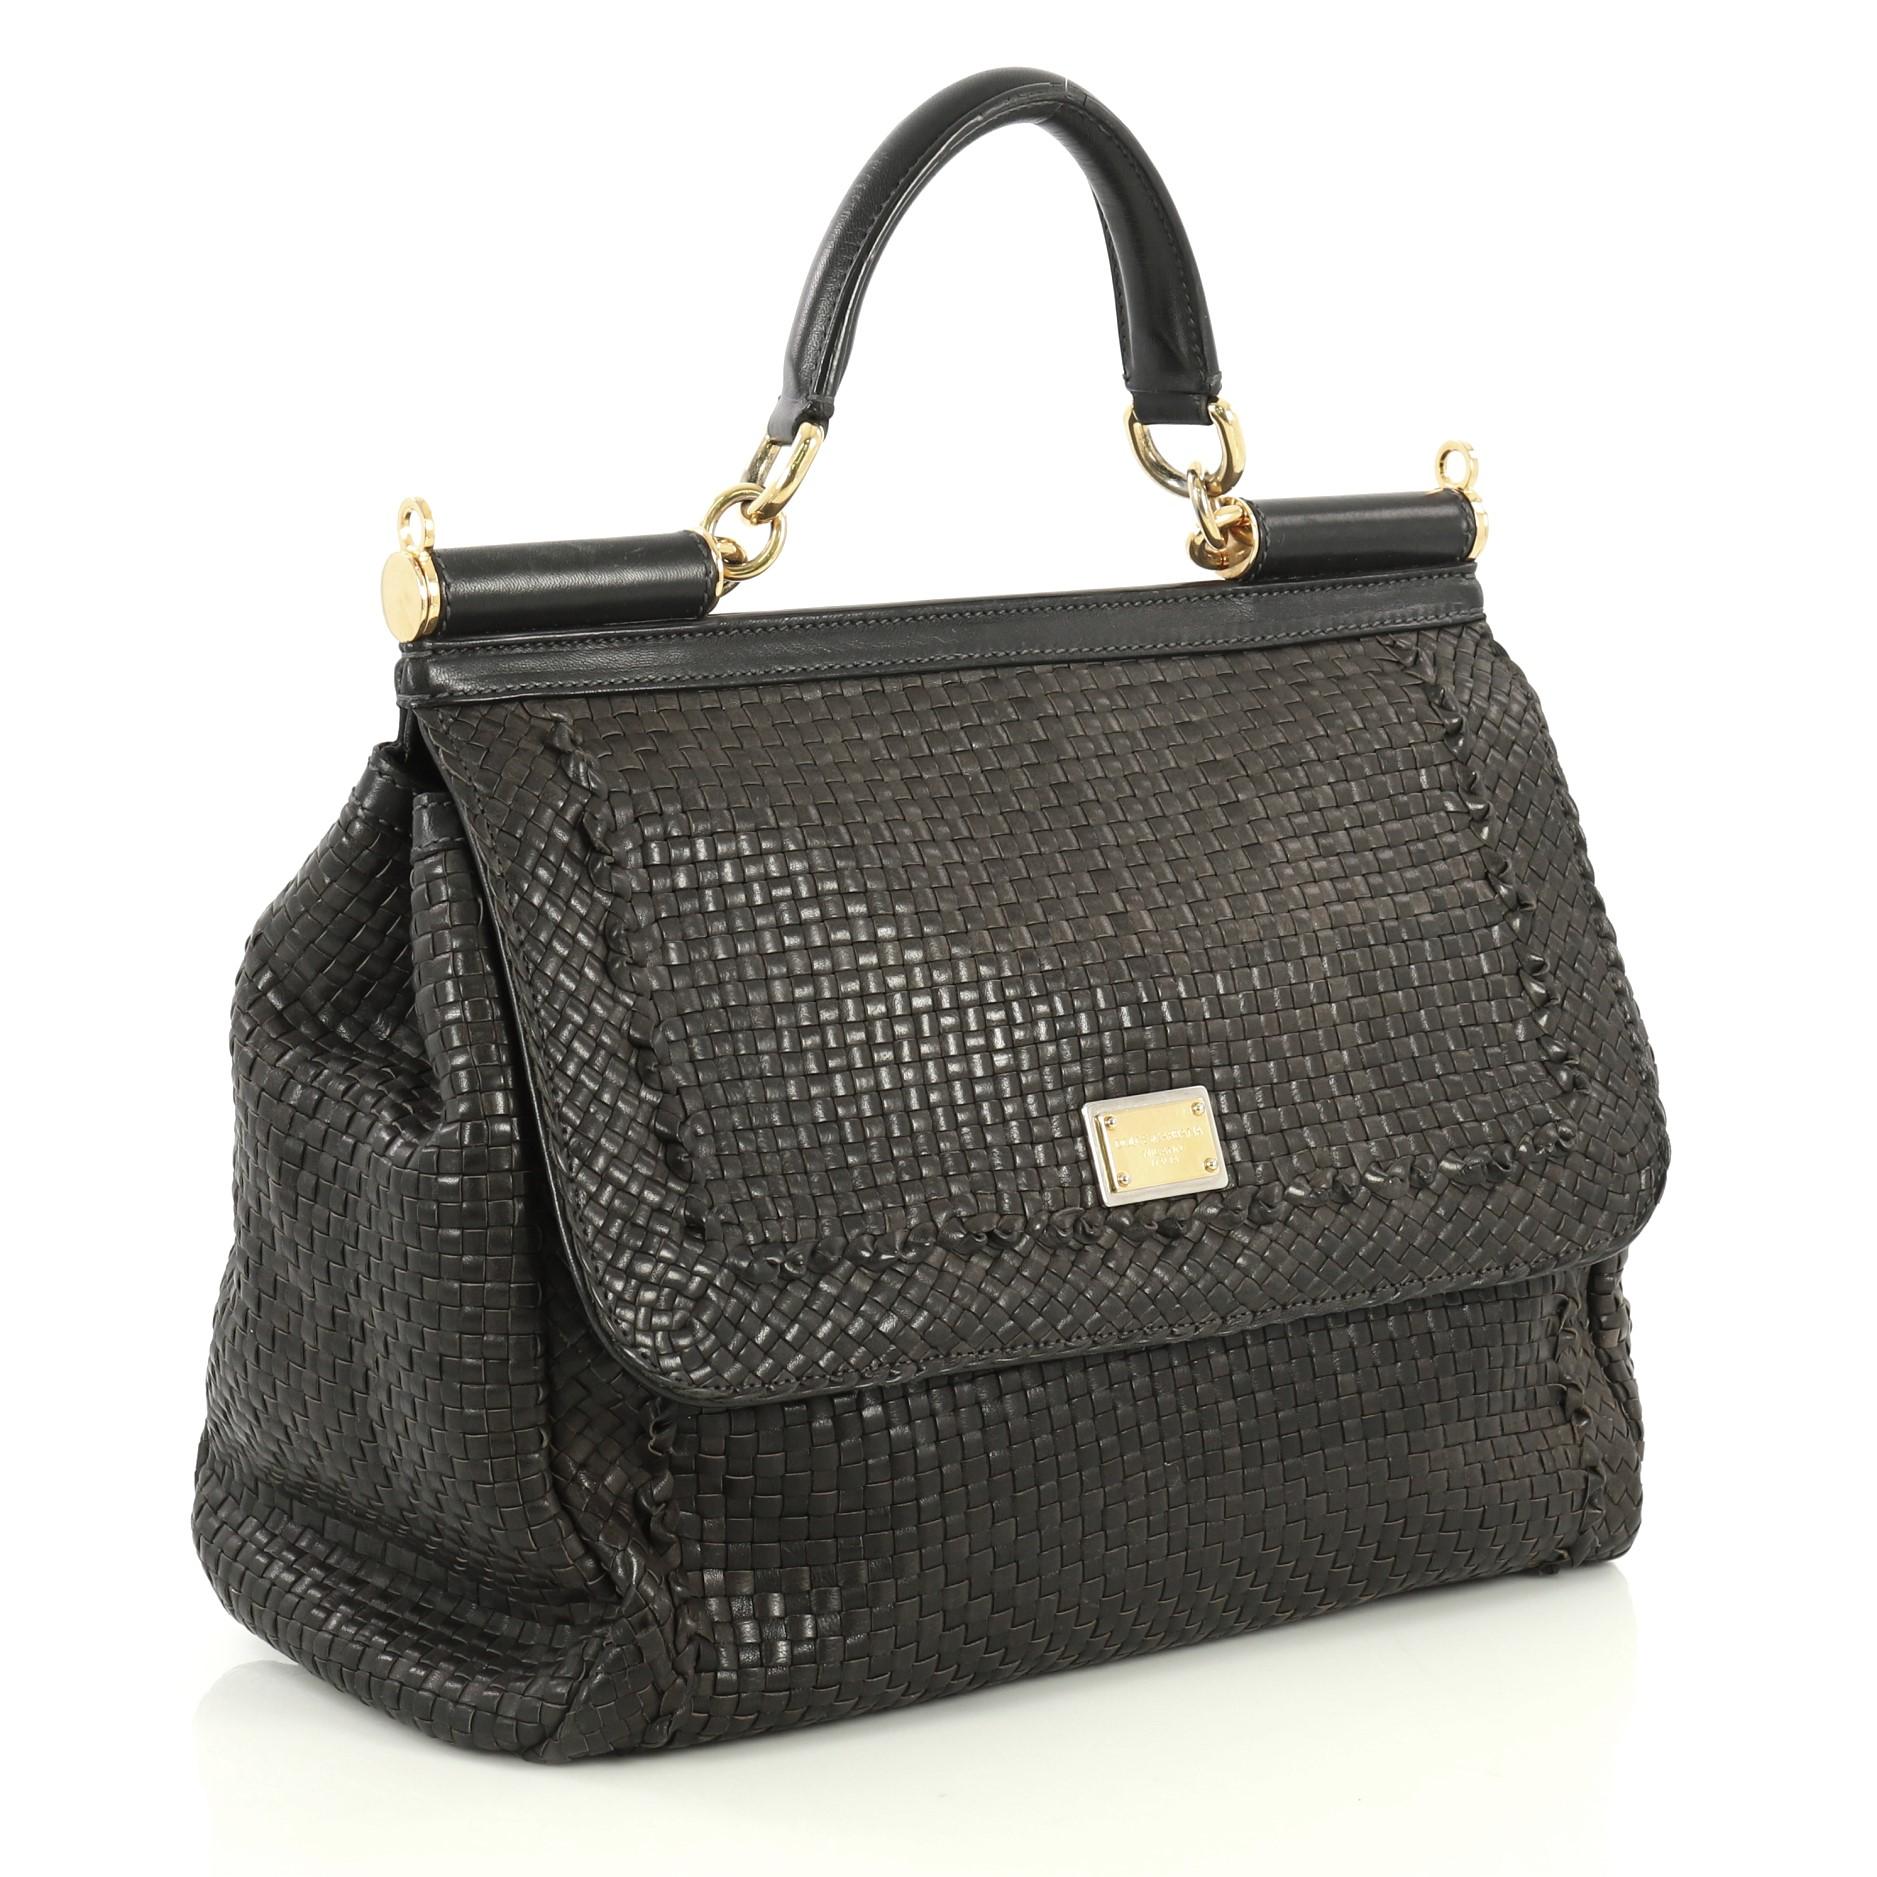 This Dolce & Gabbana Miss Sicily Bag Woven Leather Large, crafted in black leather, features a leather top handle and gold-tone hardware. Its framed top flap with magnetic snap closure opens to a black and brown printed fabric interior with zip and